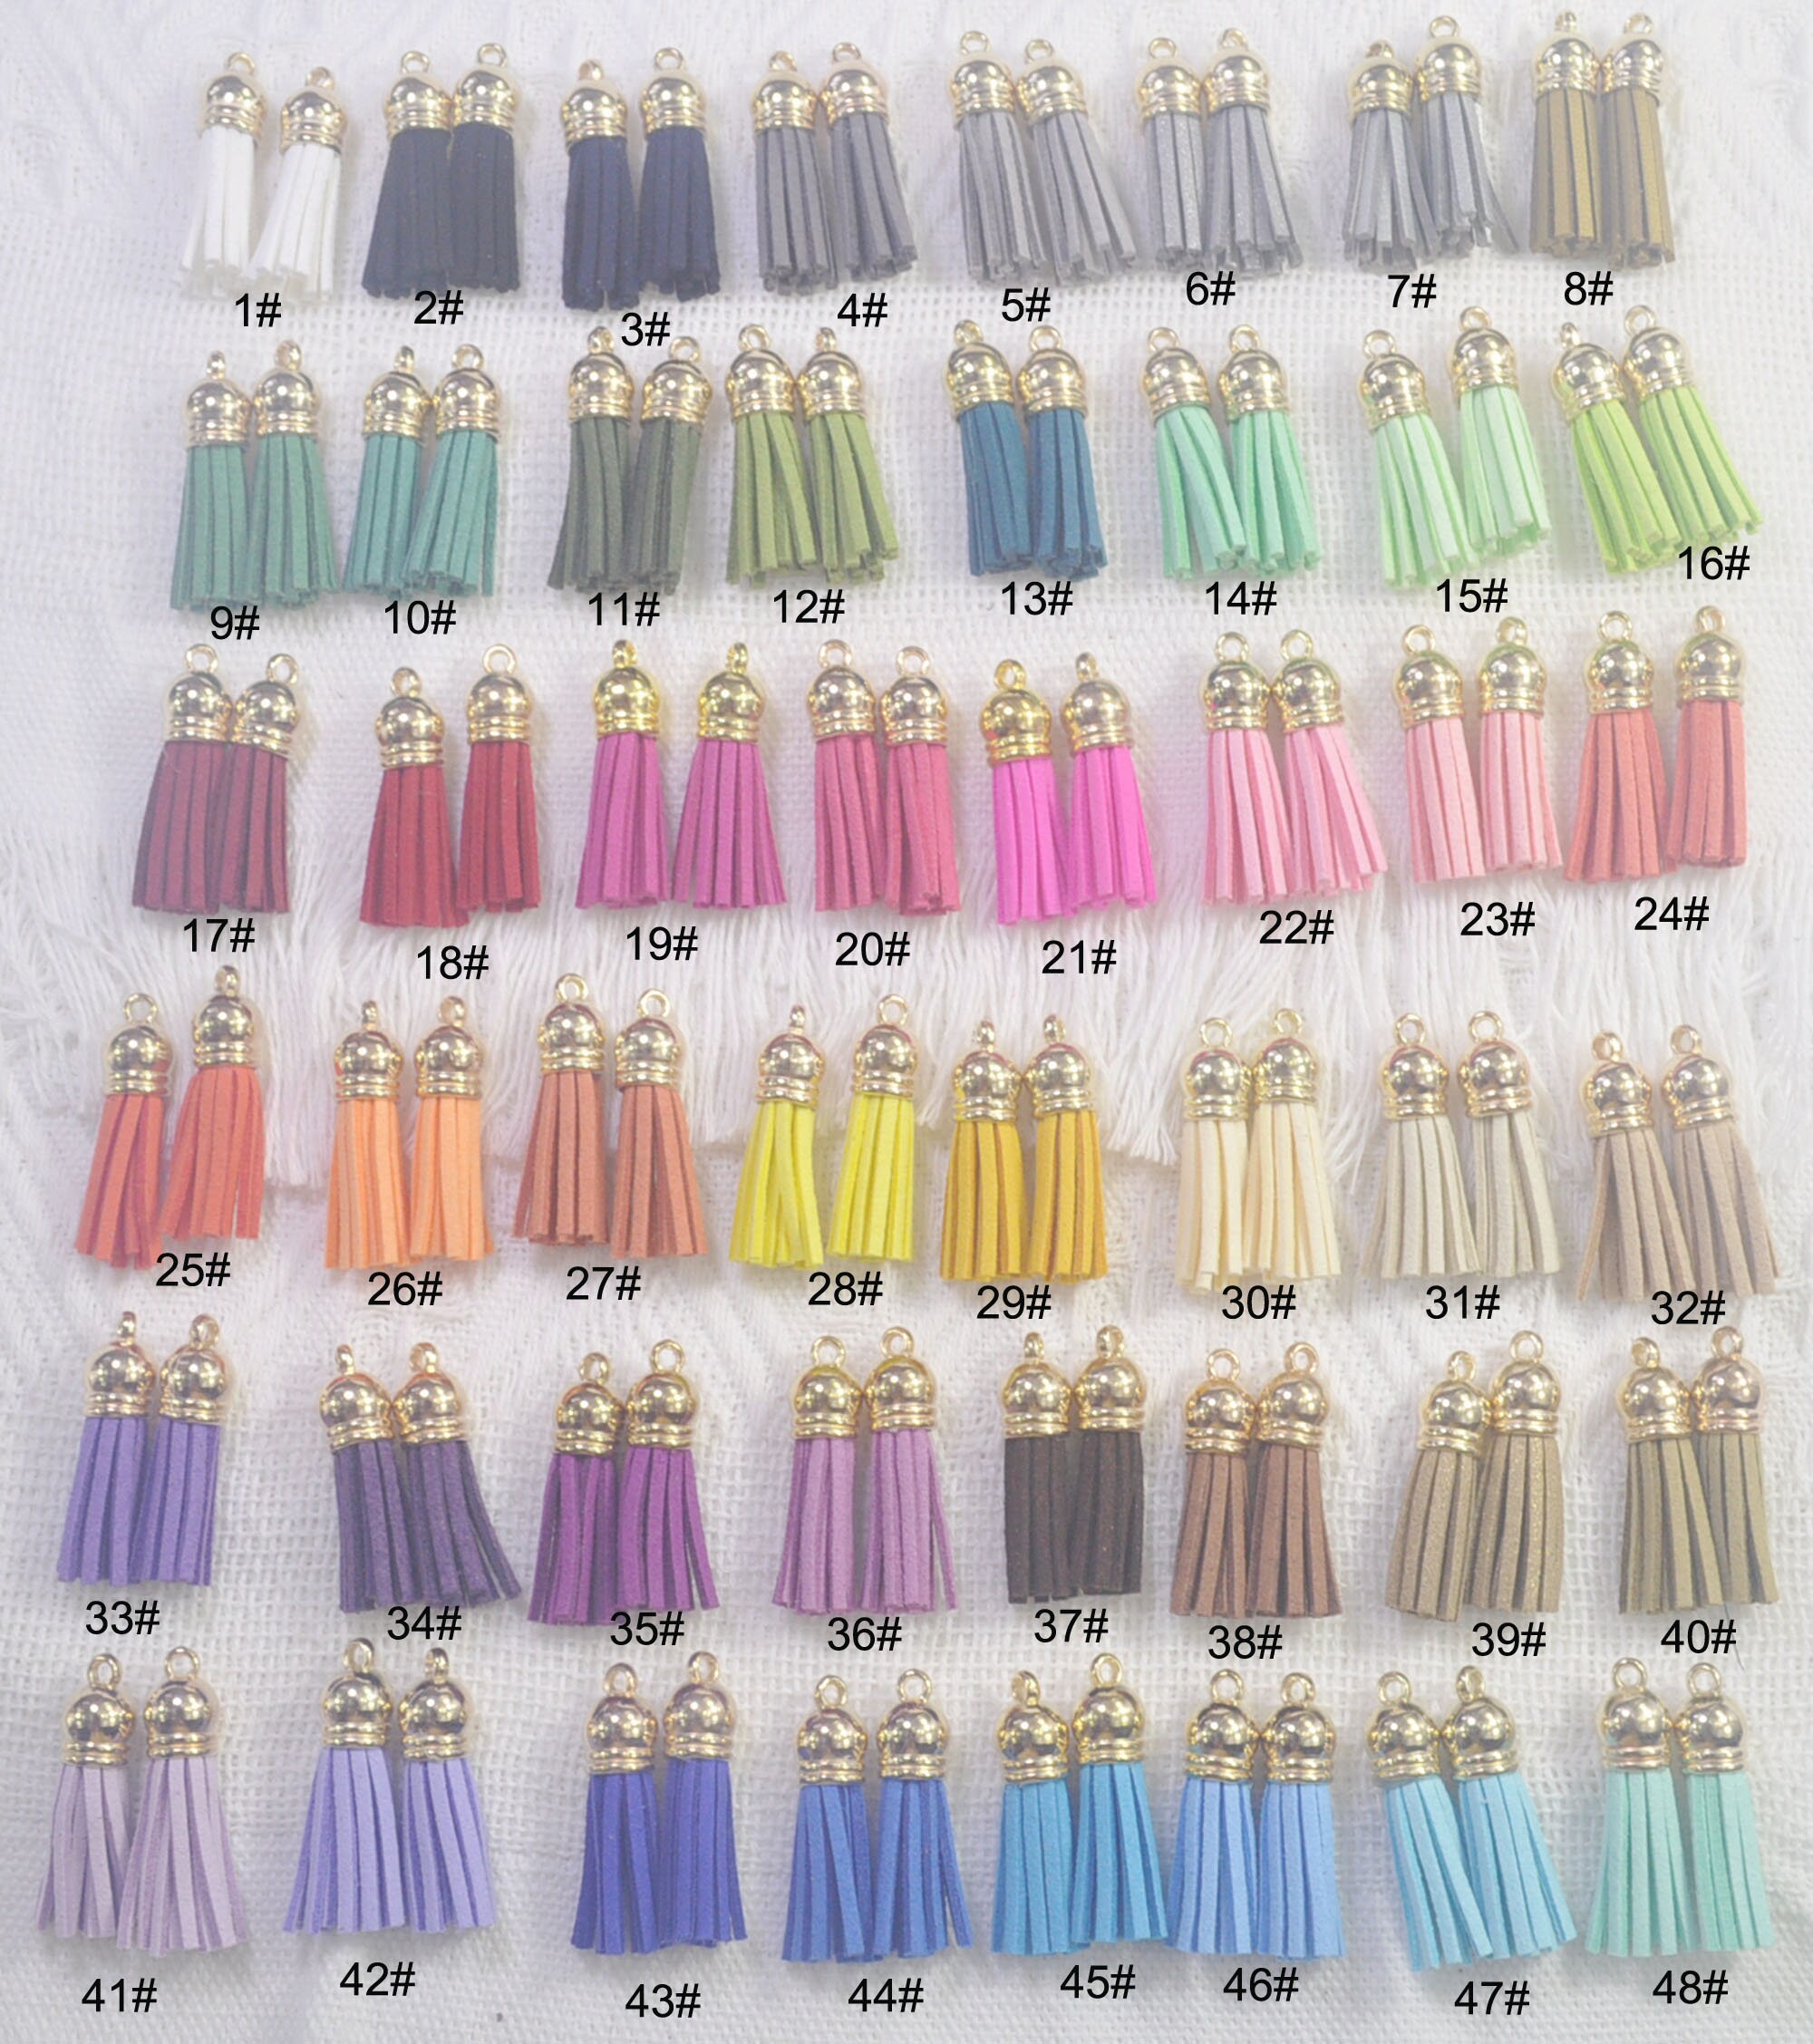 120 pcs Glitter Tassels for Jewelry Making, Mini Tassels for Crafts,  Keychain Tassels, Handmade Craft Supplies Contain Gold and Silver caps,  Each caps Set of 15 Colors